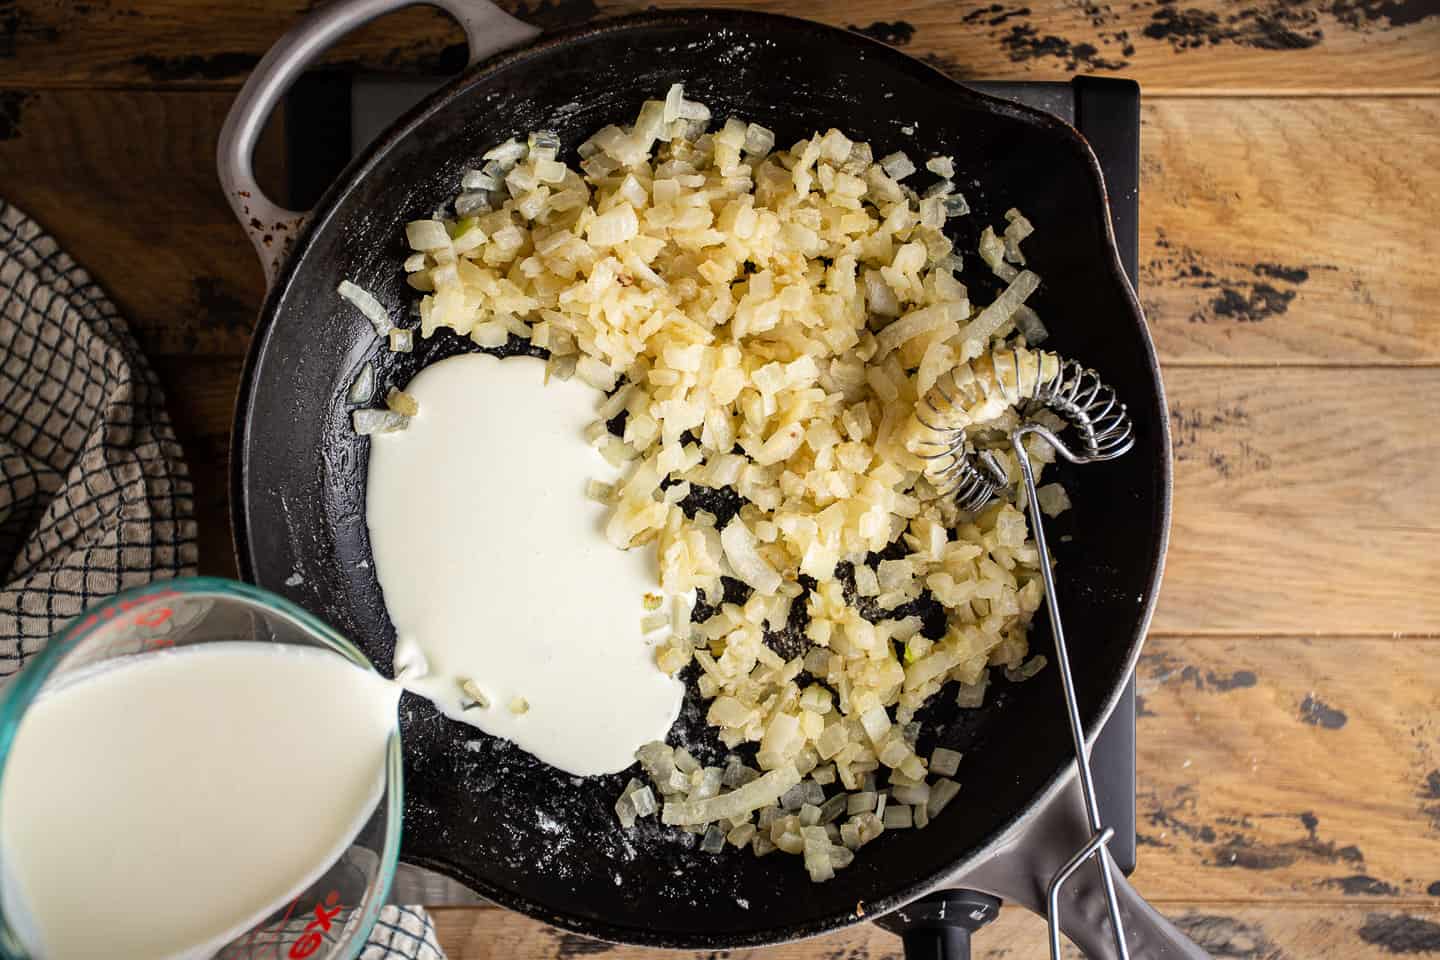 Pouring cream into onions and roux to make a cream sauce.